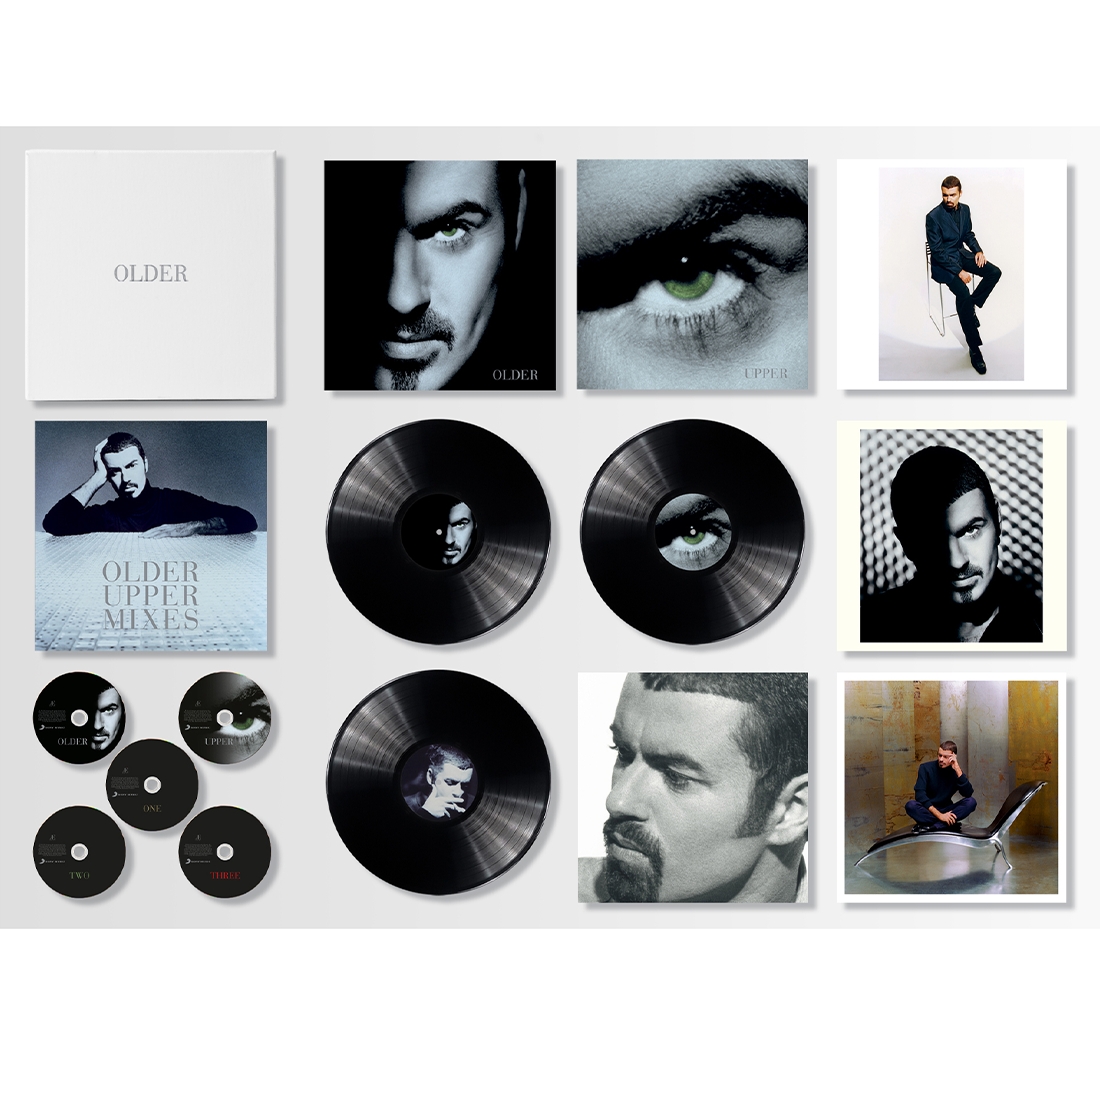 George Michael - Older: Deluxe Limited Edition 3LP/5CD Box Set